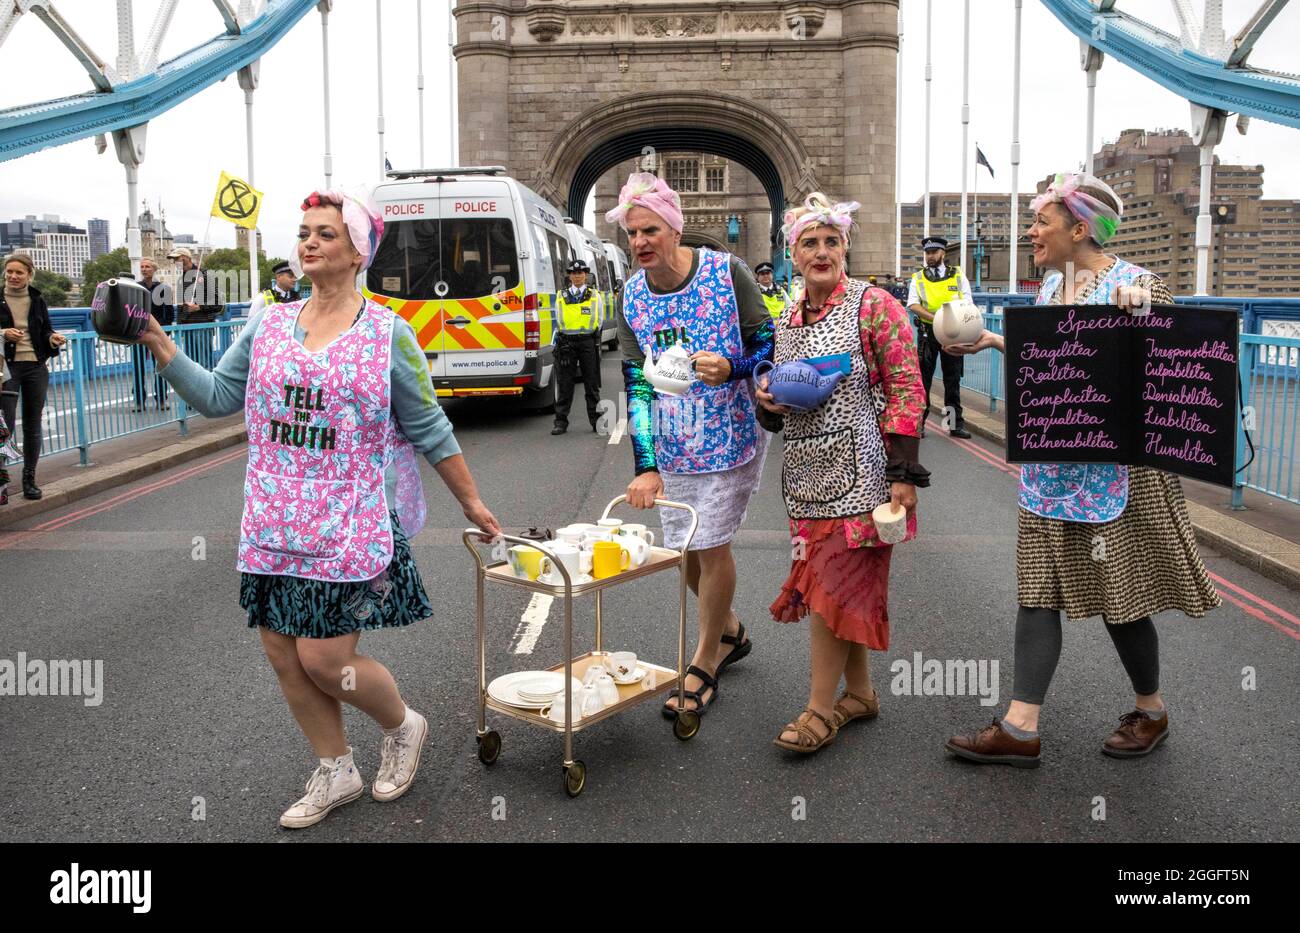 London, UK. 30th Aug, 2021. London, UK 30 8 21 Demonstrators dressed as tea ladies on Tower Bridge. Members of Extinction Rebellion march from The Shard to Tower Bridge where supporters climb on top of a caravan and block the road. Extinction Rebellion Credit: Mark Thomas/Alamy Live News Stock Photo